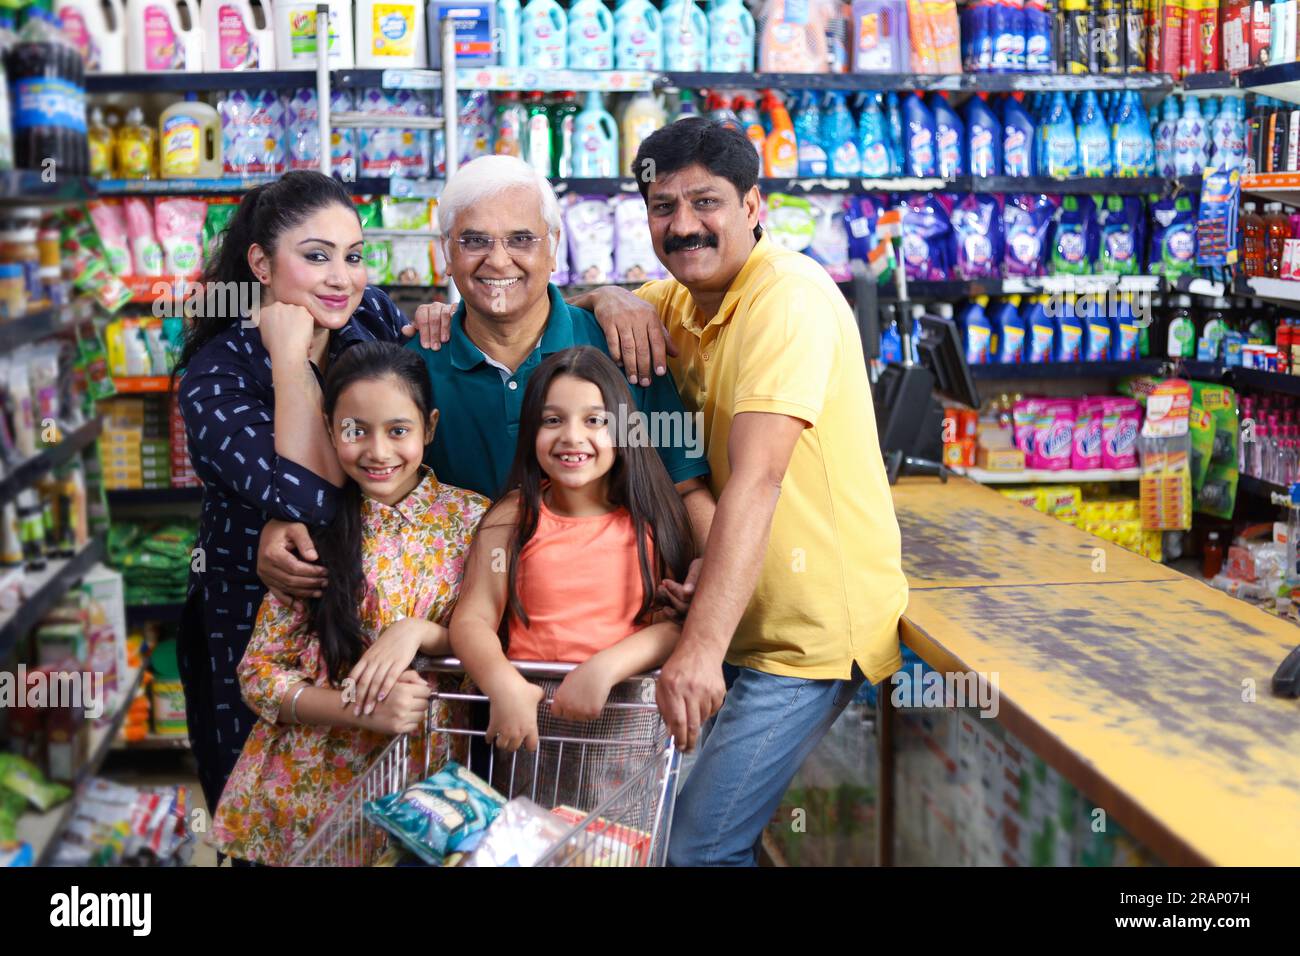 happy family shopping in grocery store and supermarket. They are looking for desired products they need to purchase. Stock Photo